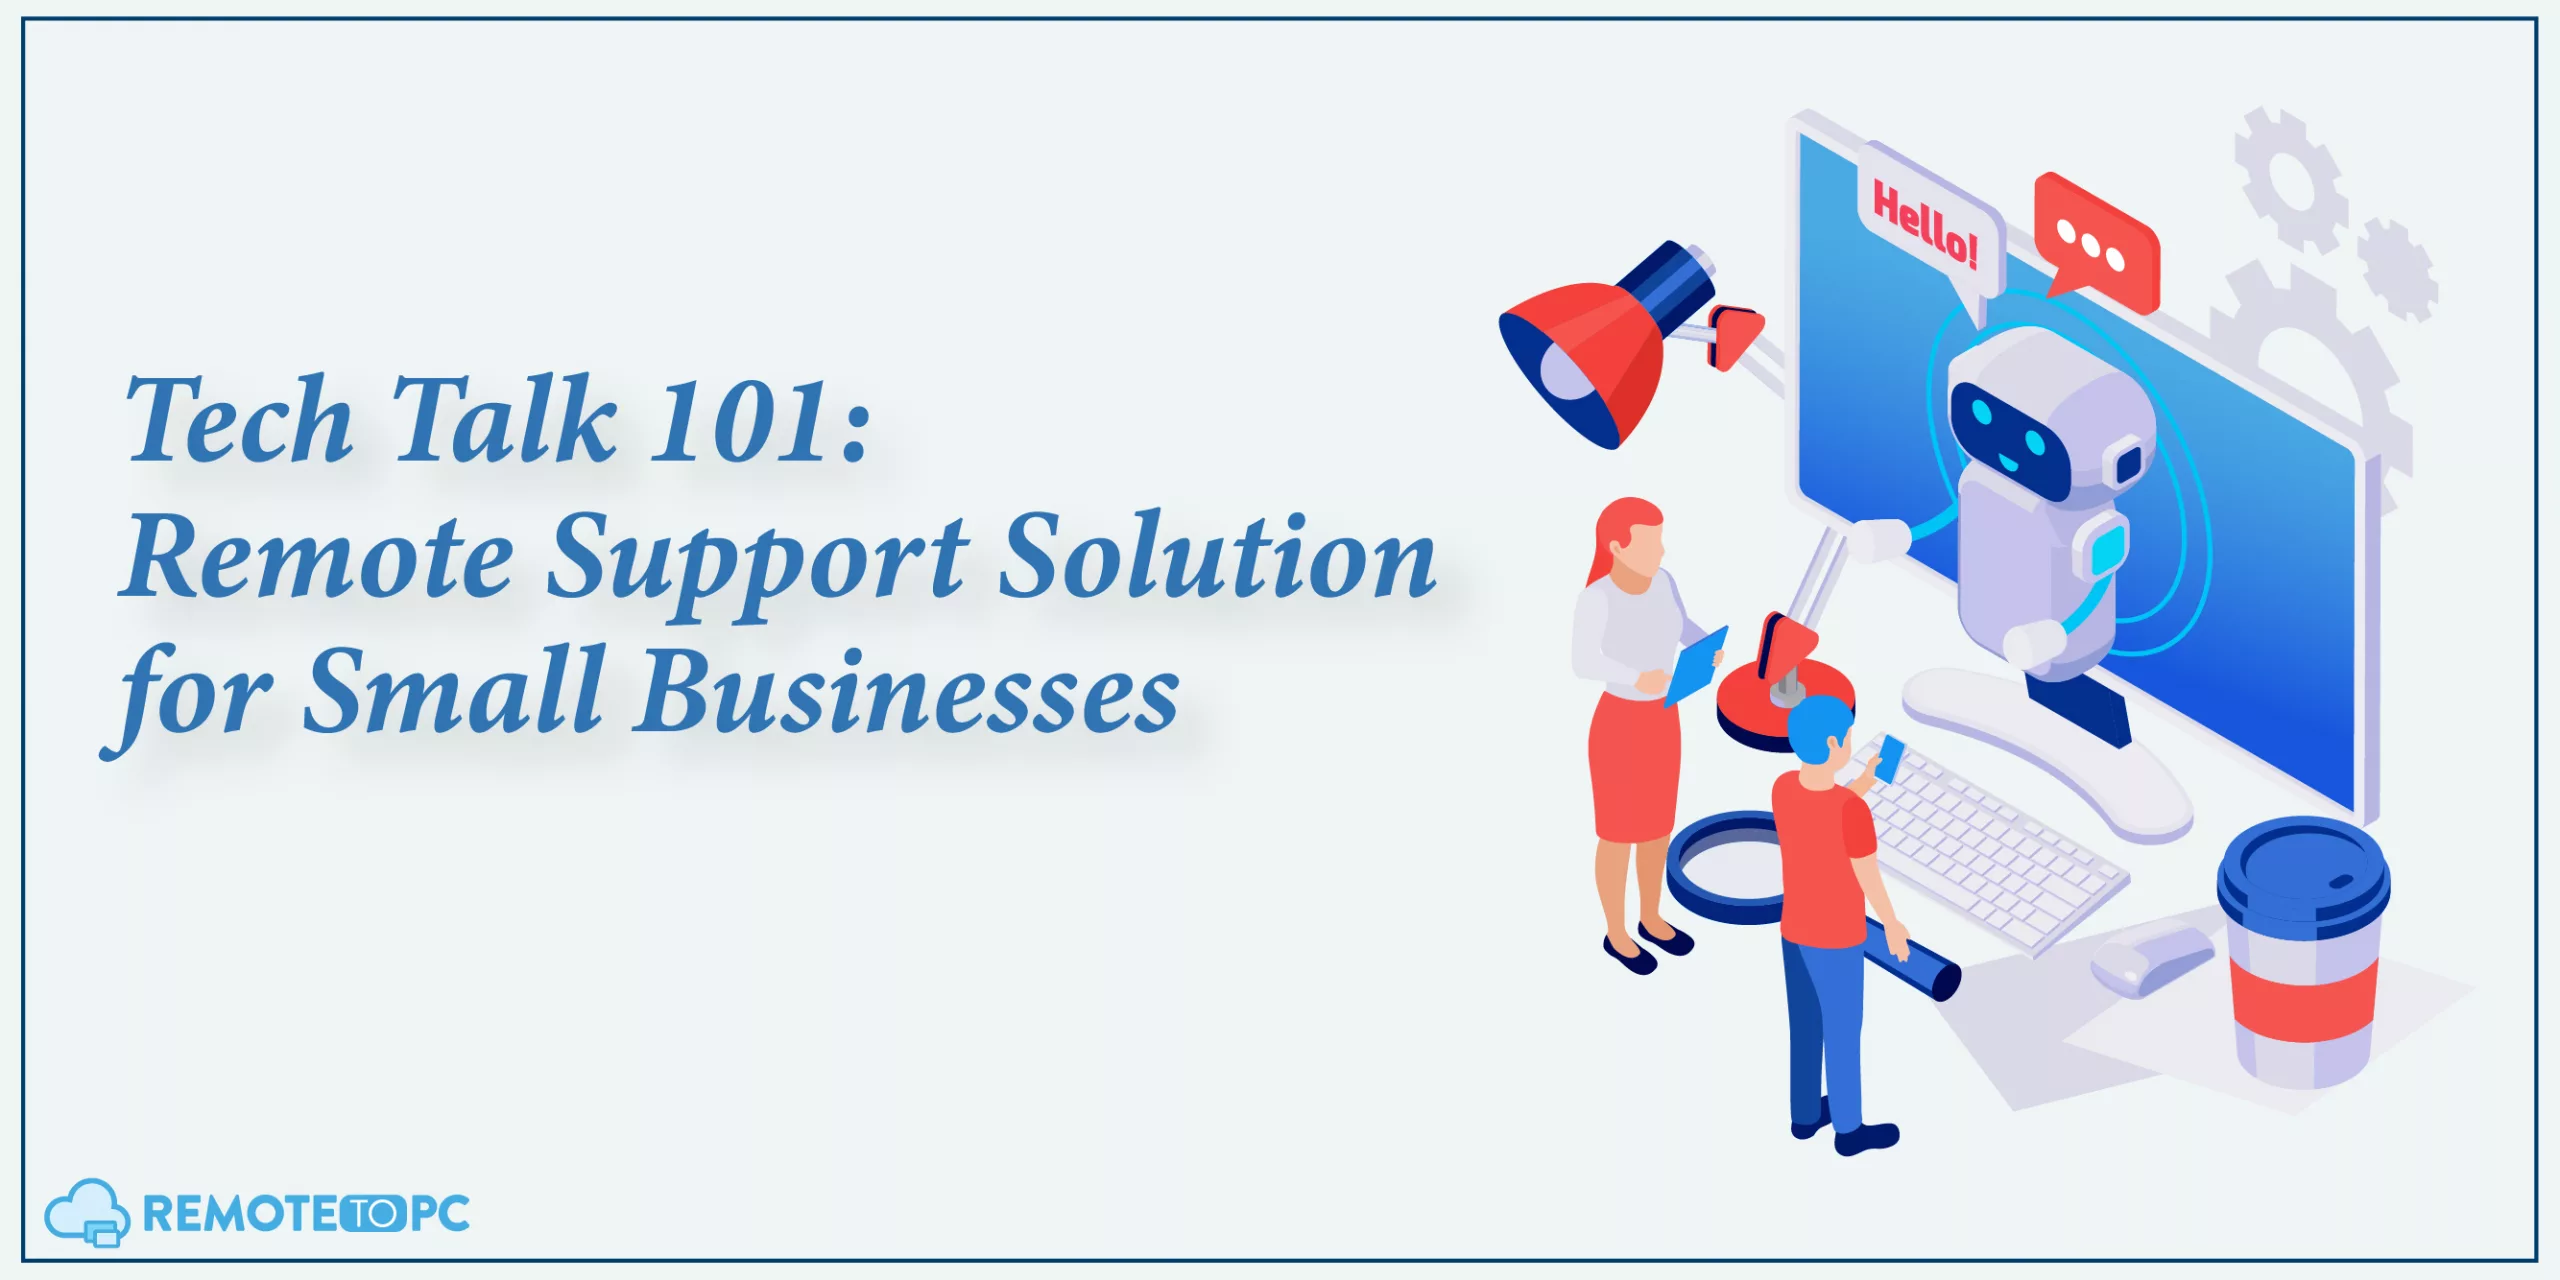 Remotetopc Remote Support Solution for Small Businesses